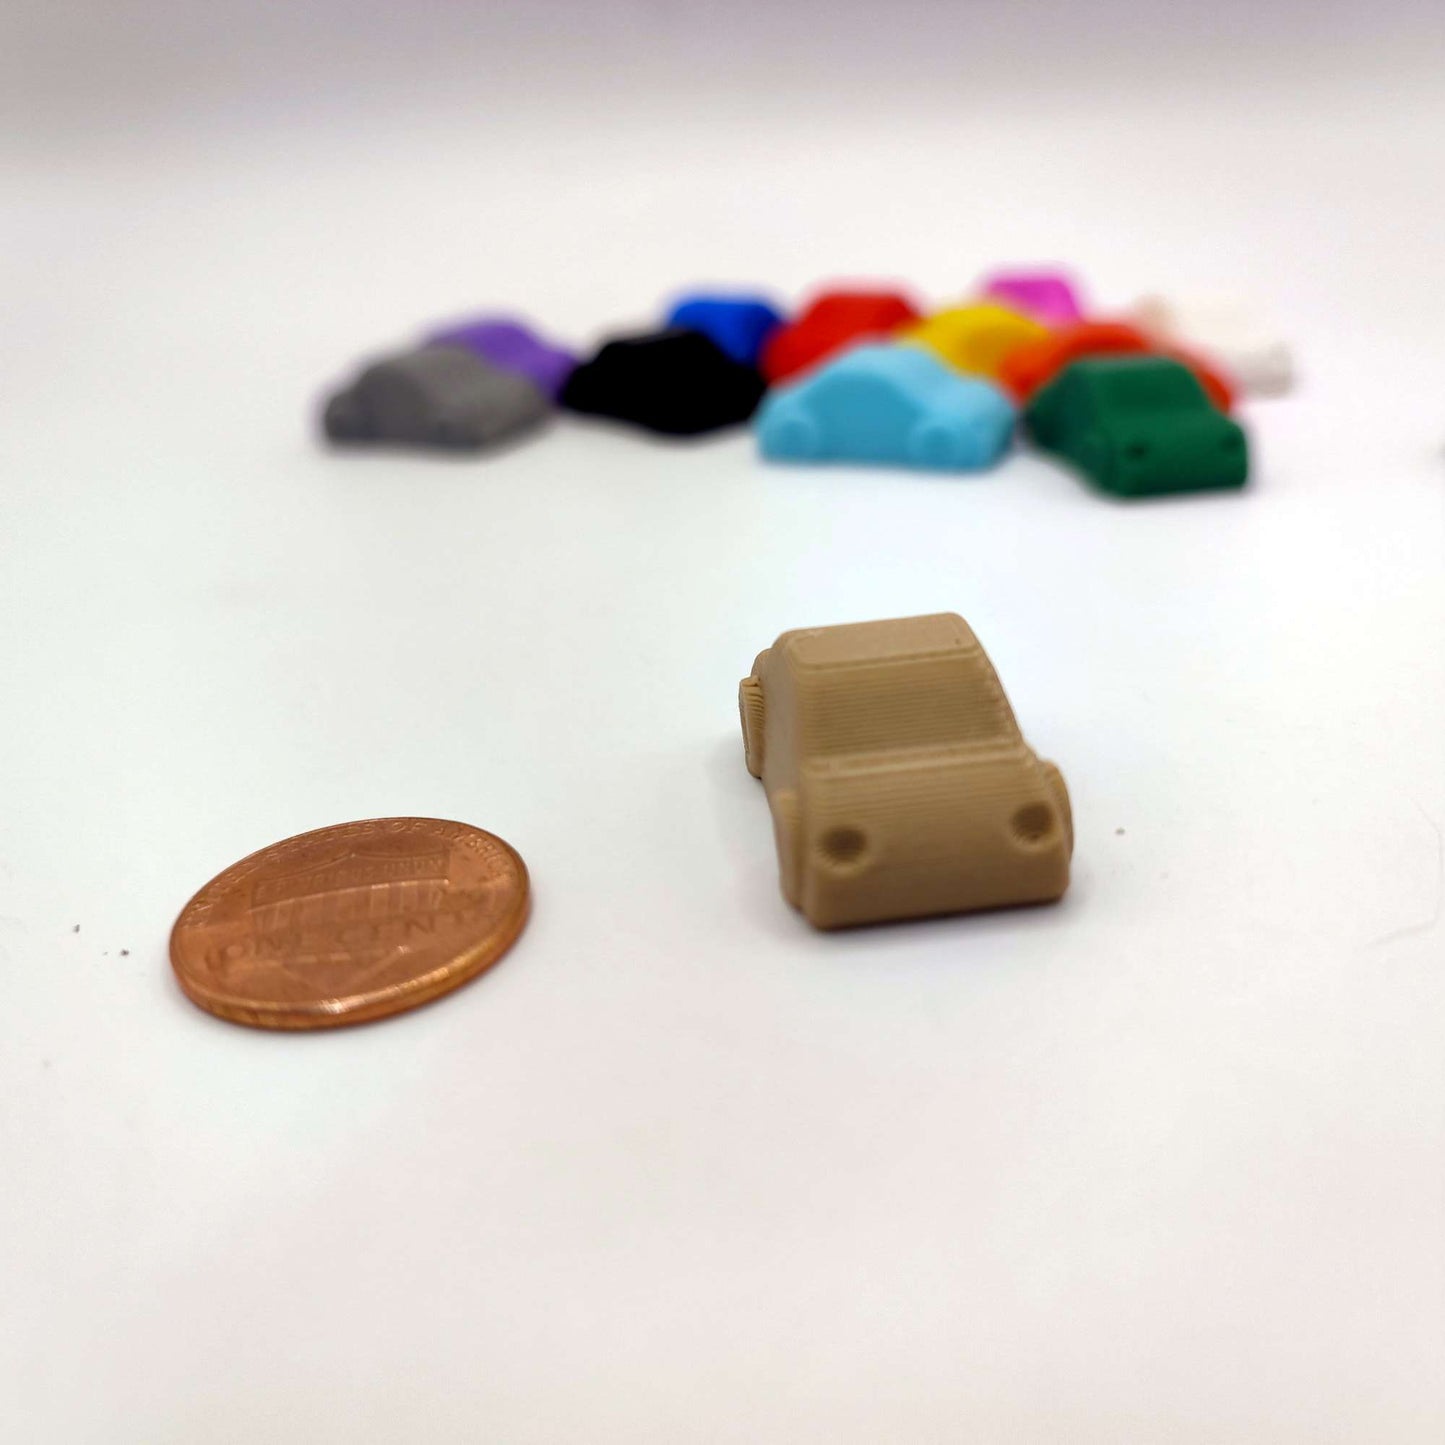 Small Game Tokens Shaped as Cars 13 various colors